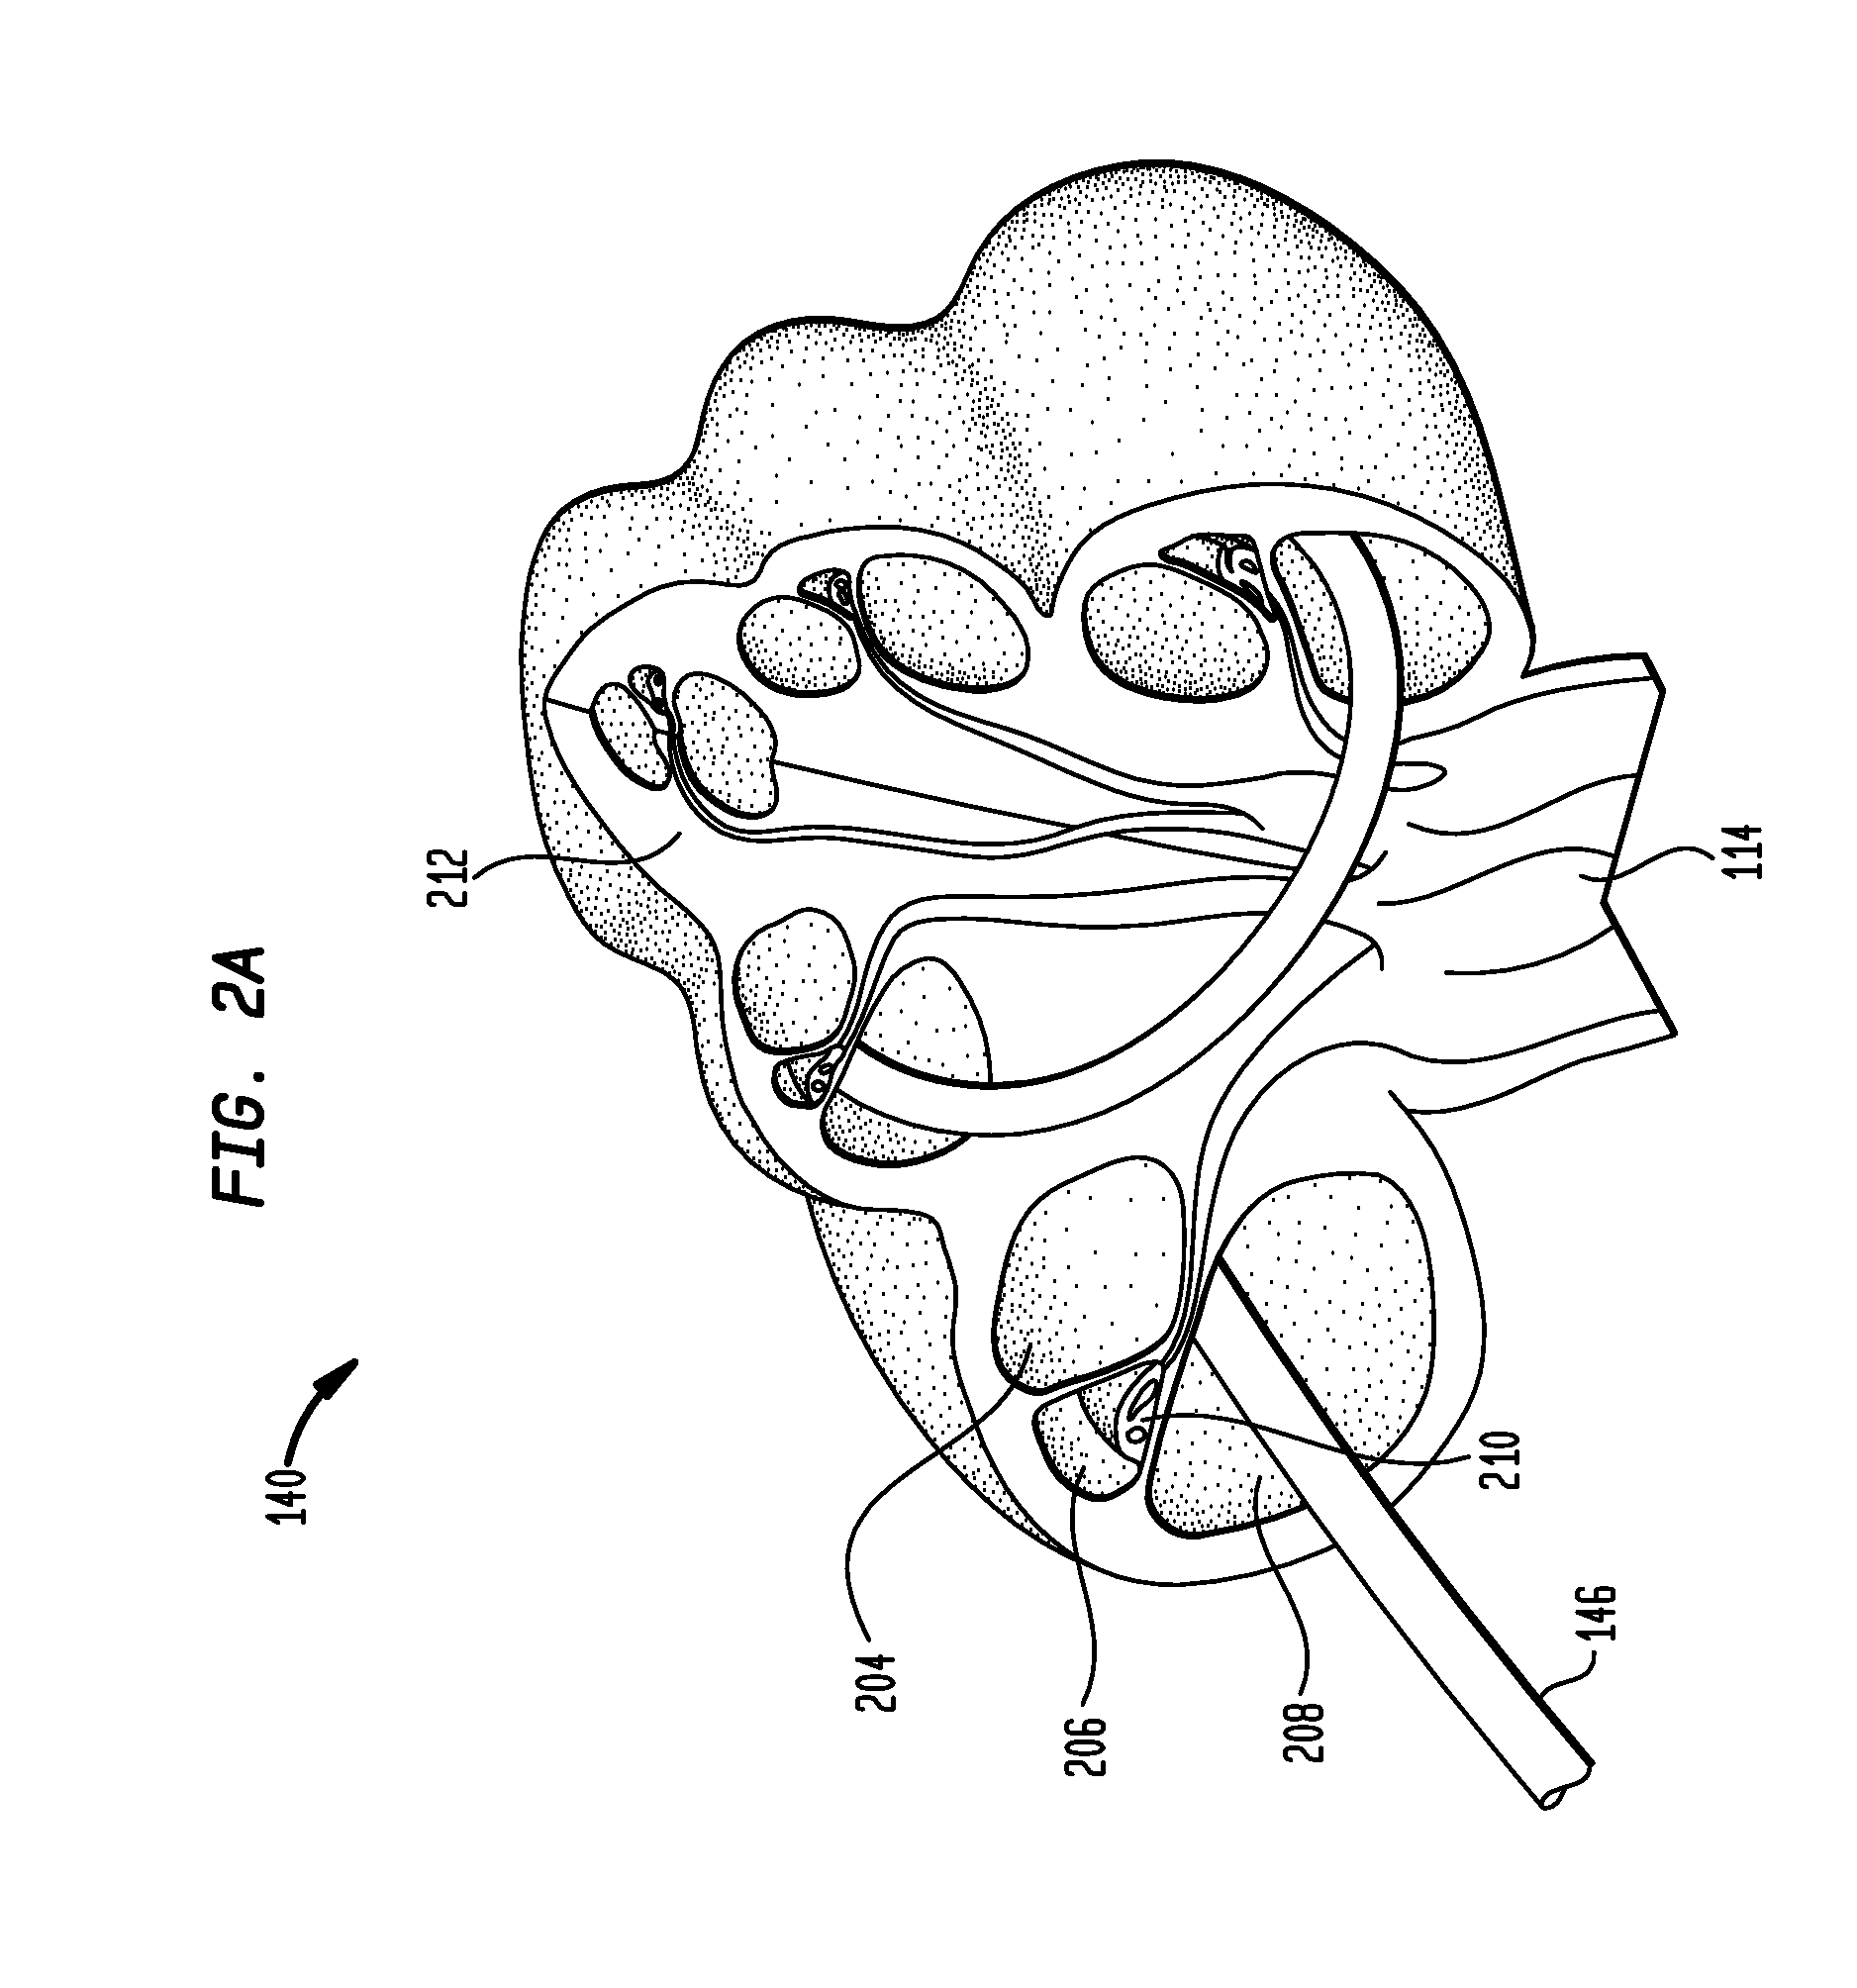 Manufacturing an electrode carrier for an implantable medical device